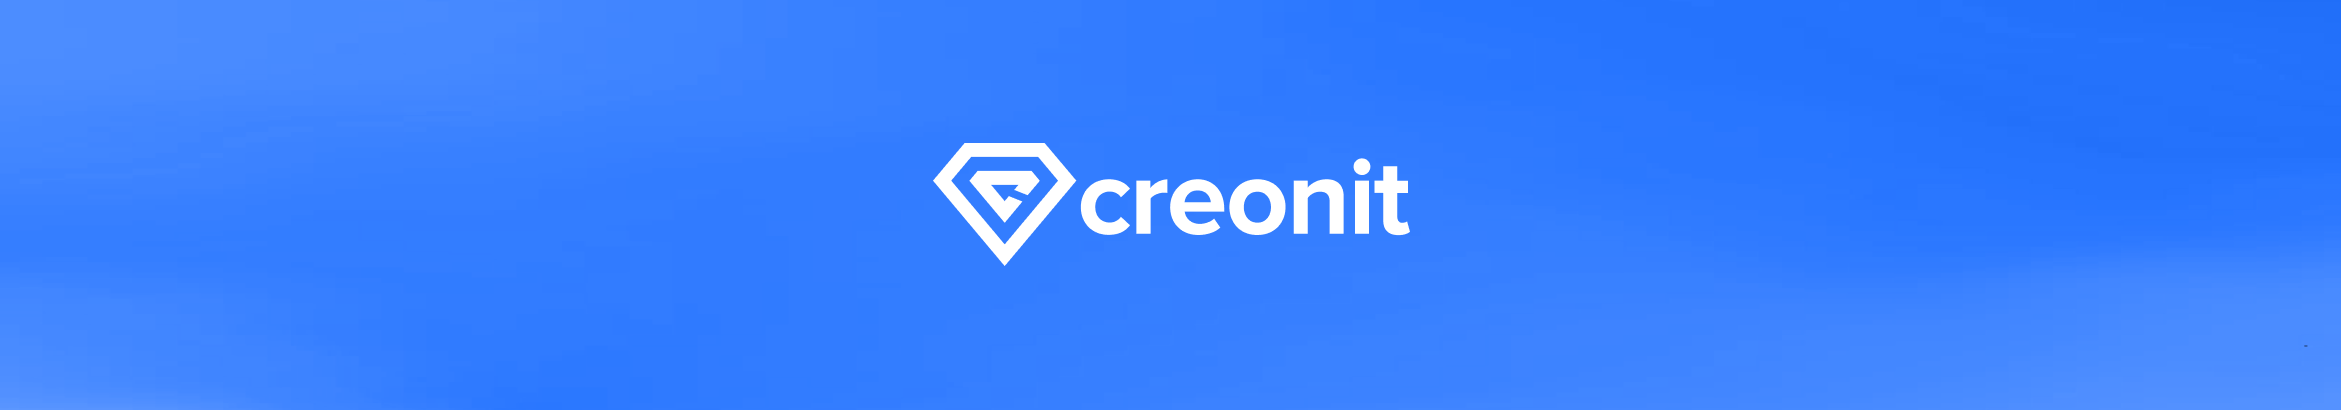 Creonit ®'s profile banner